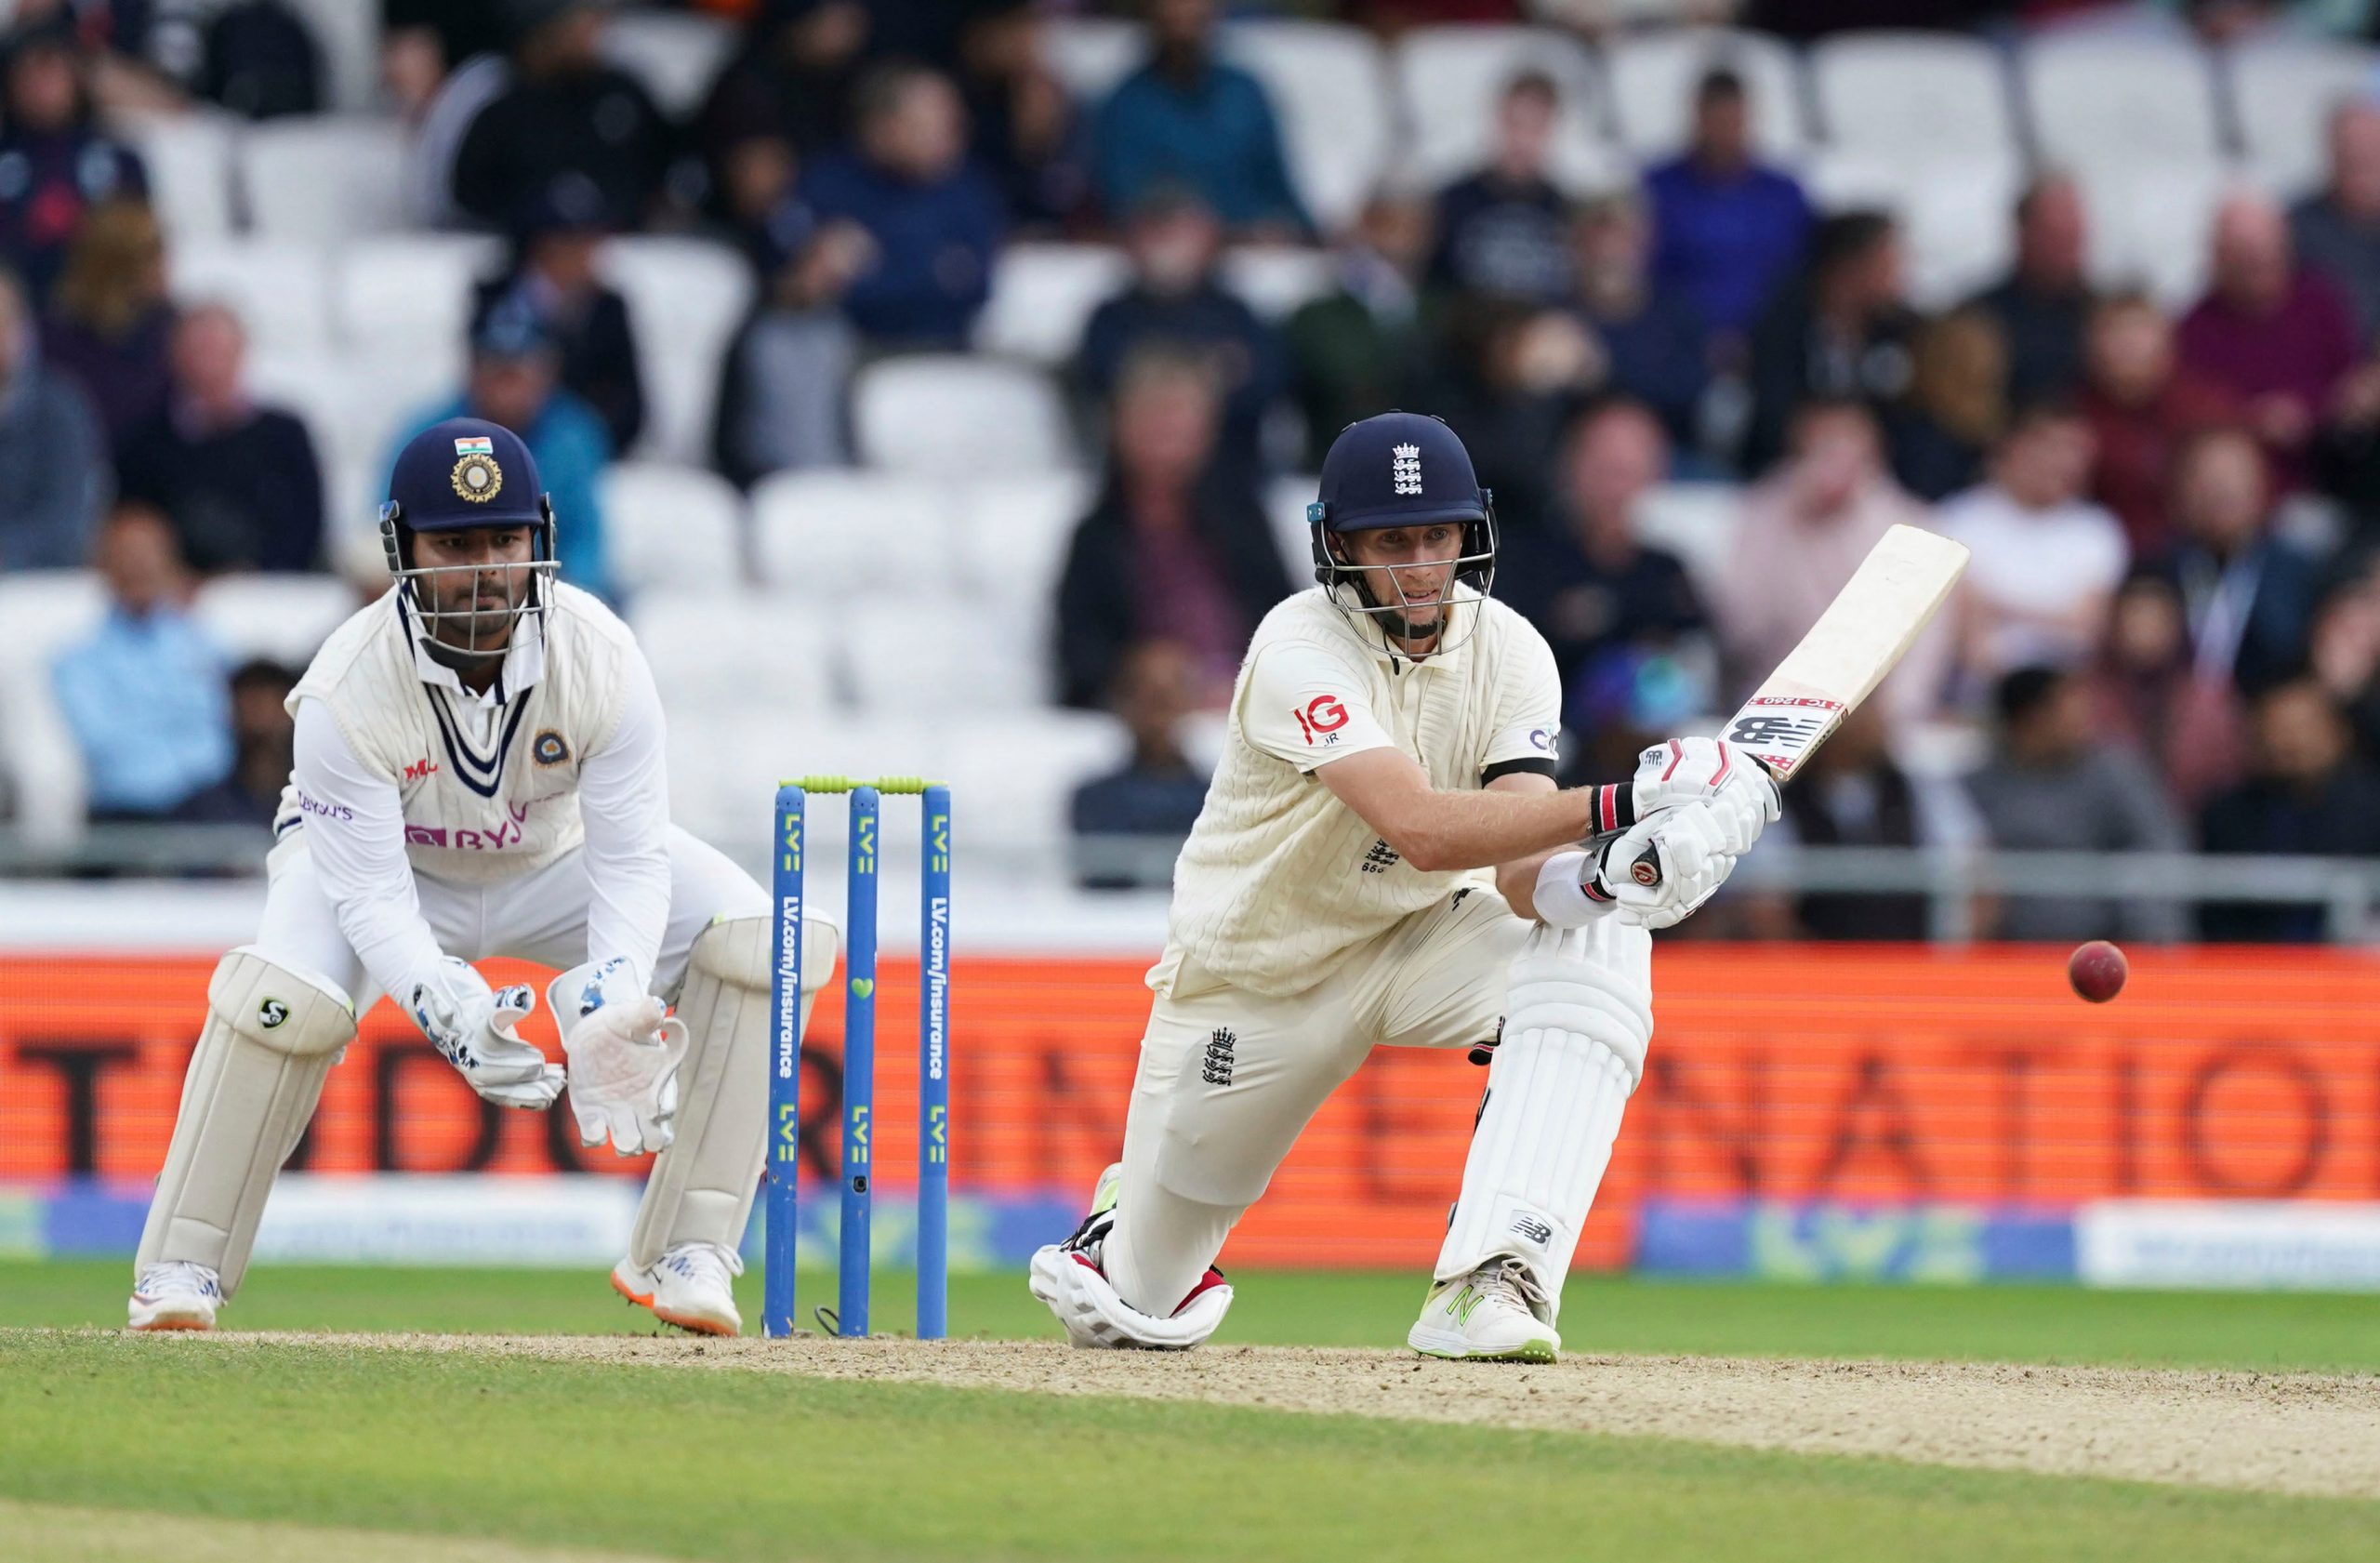 3rd Test: England 423/8 at stumps, lead by 345 runs